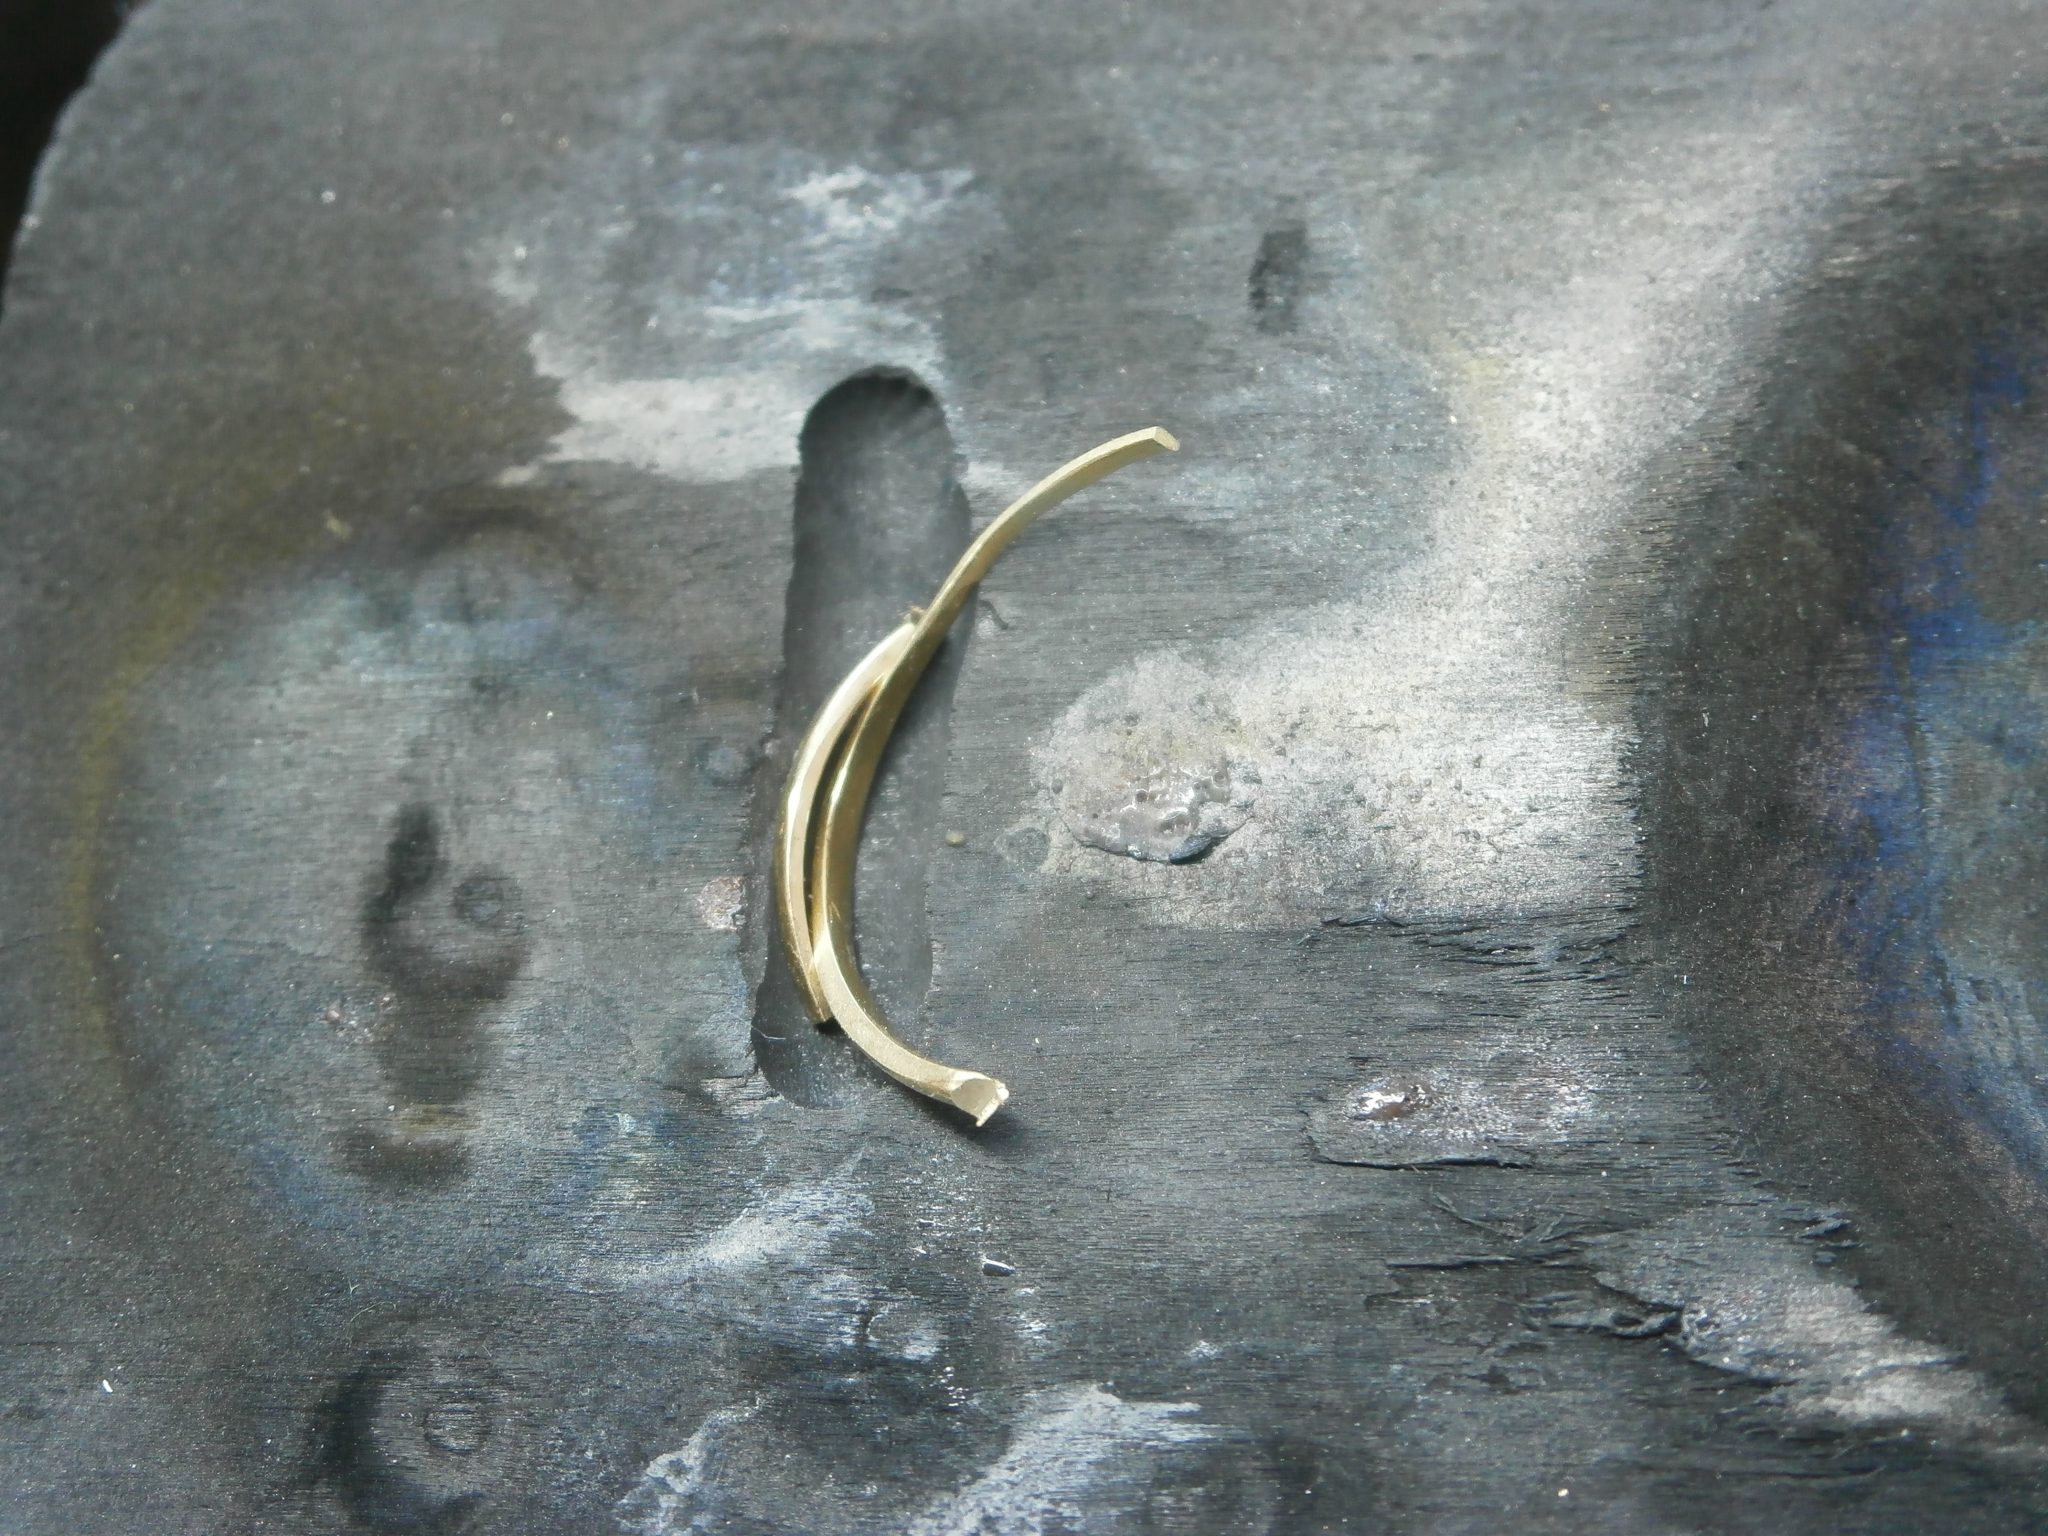 The shaft of the gold ring is placed into a small groove in a heat resistant charcoal block